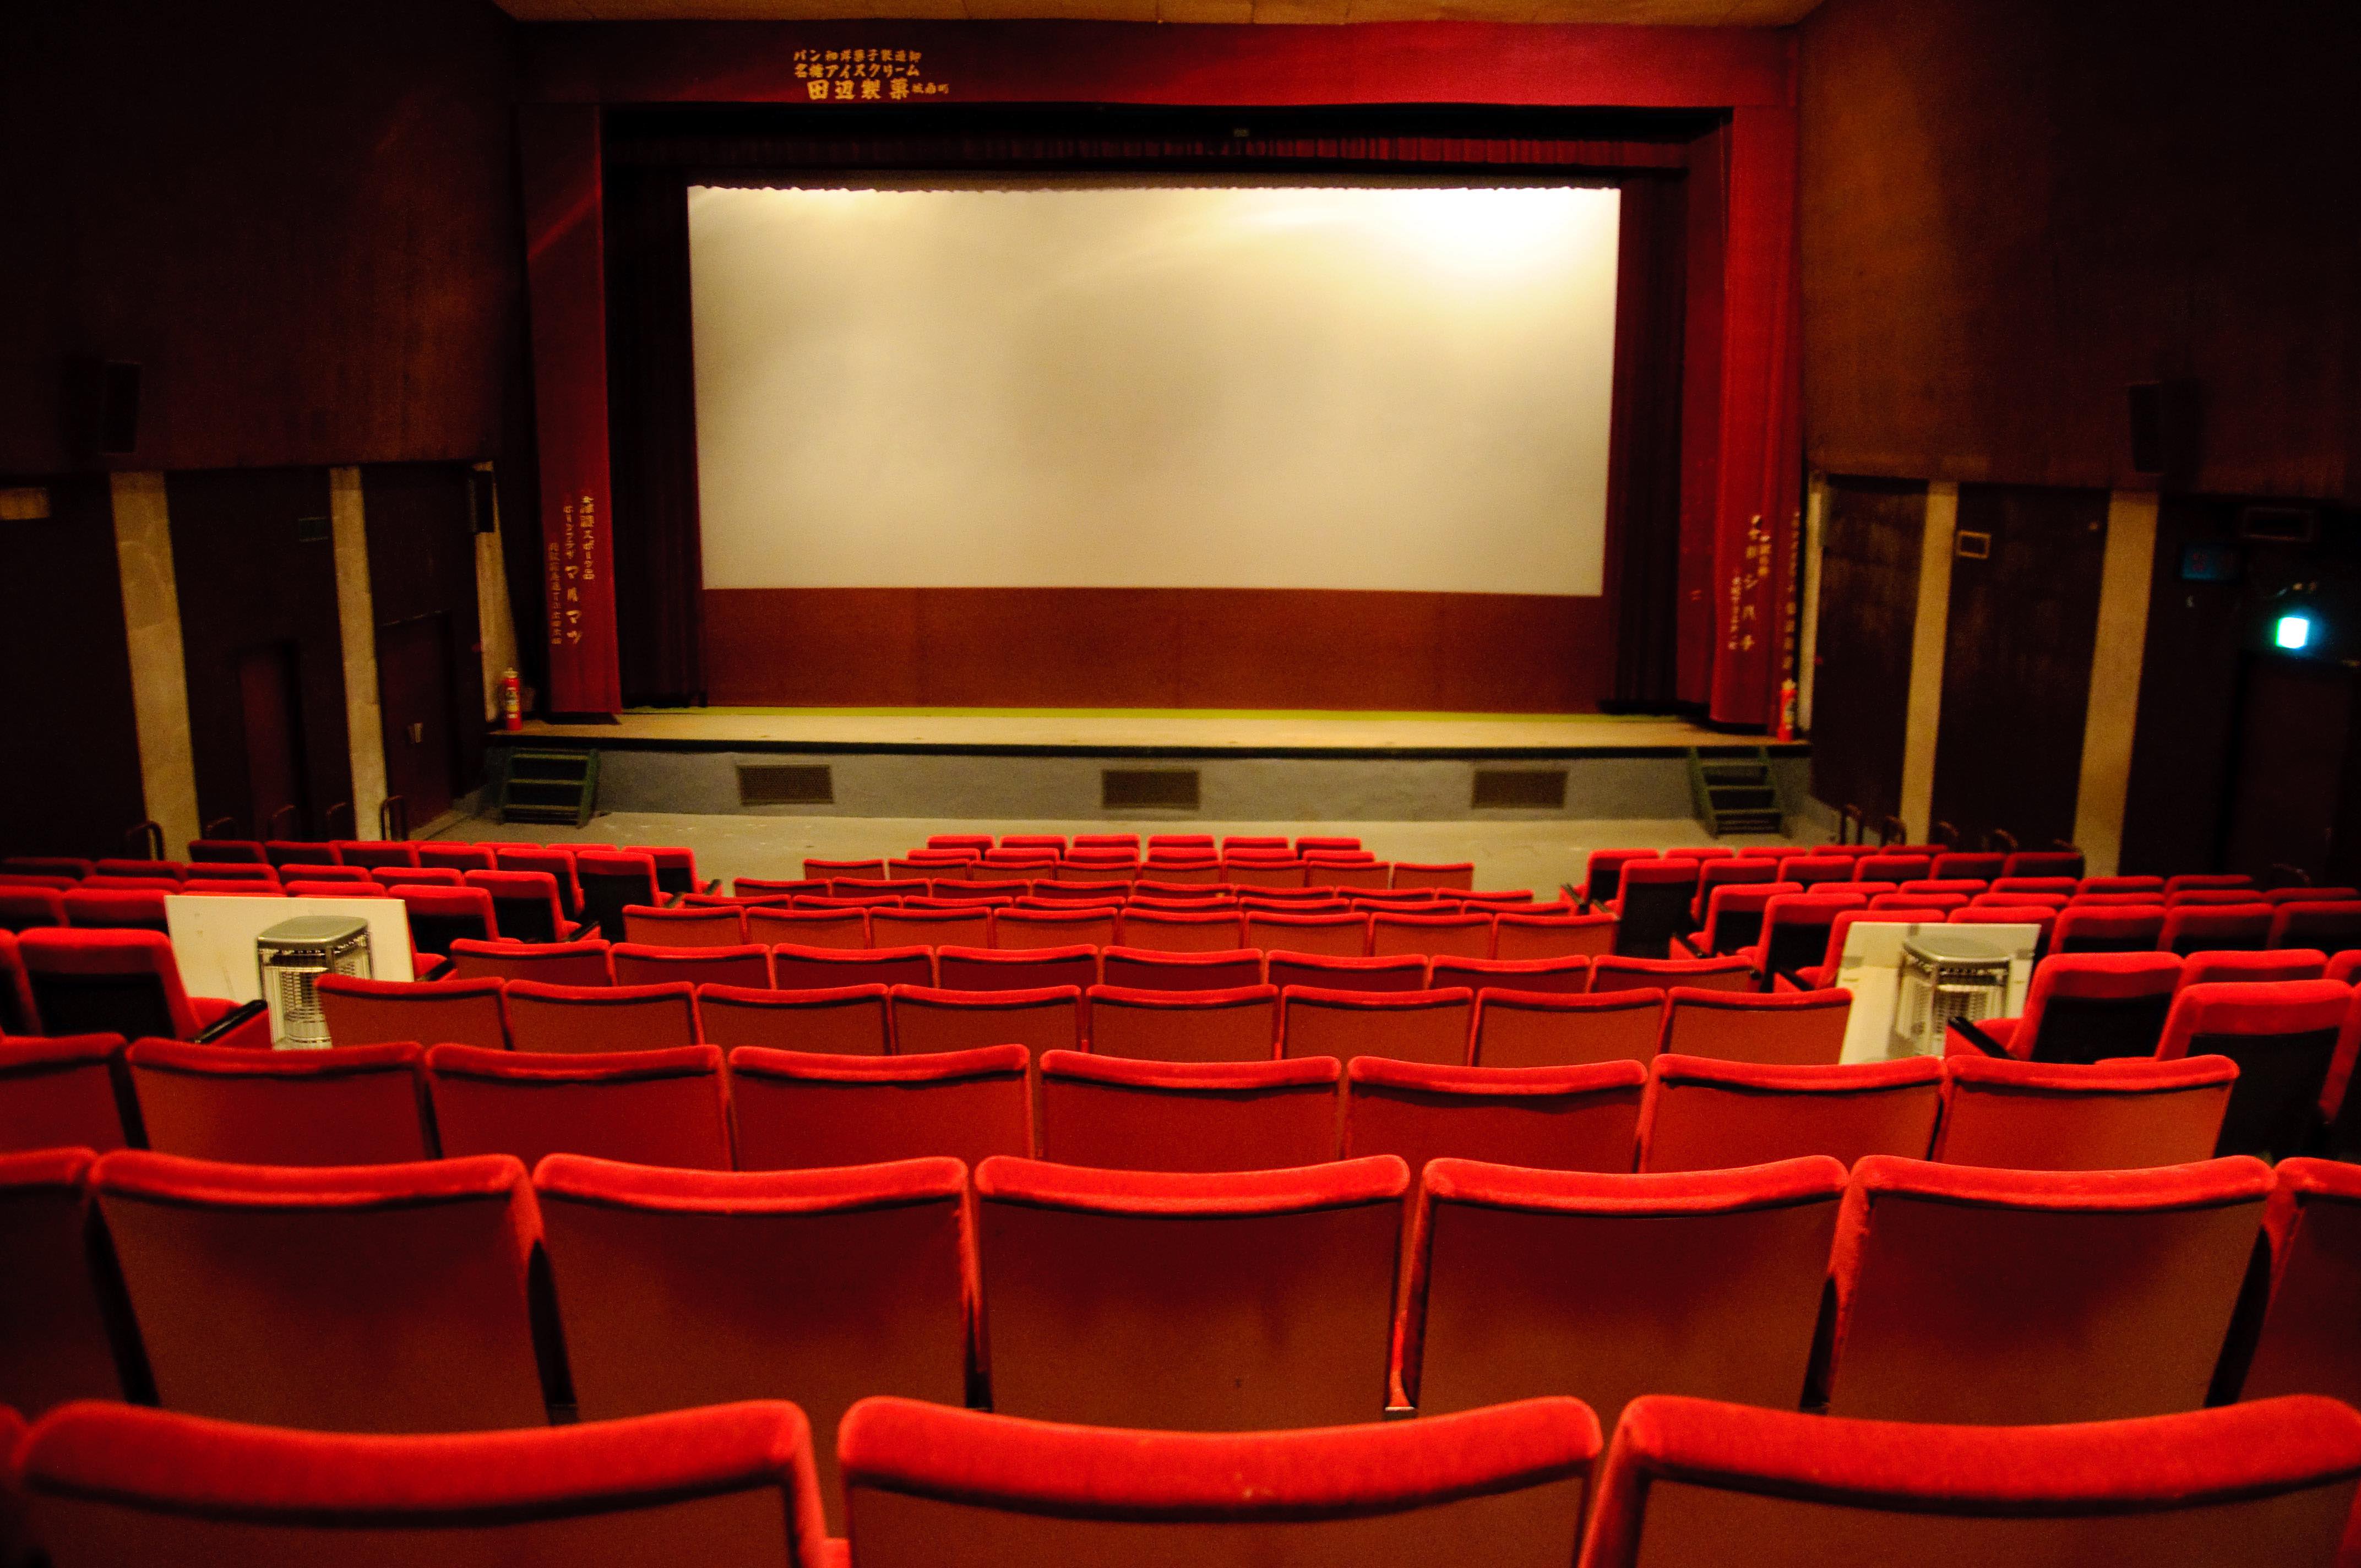 Loud movies at the movie theater can seriously damage hearing